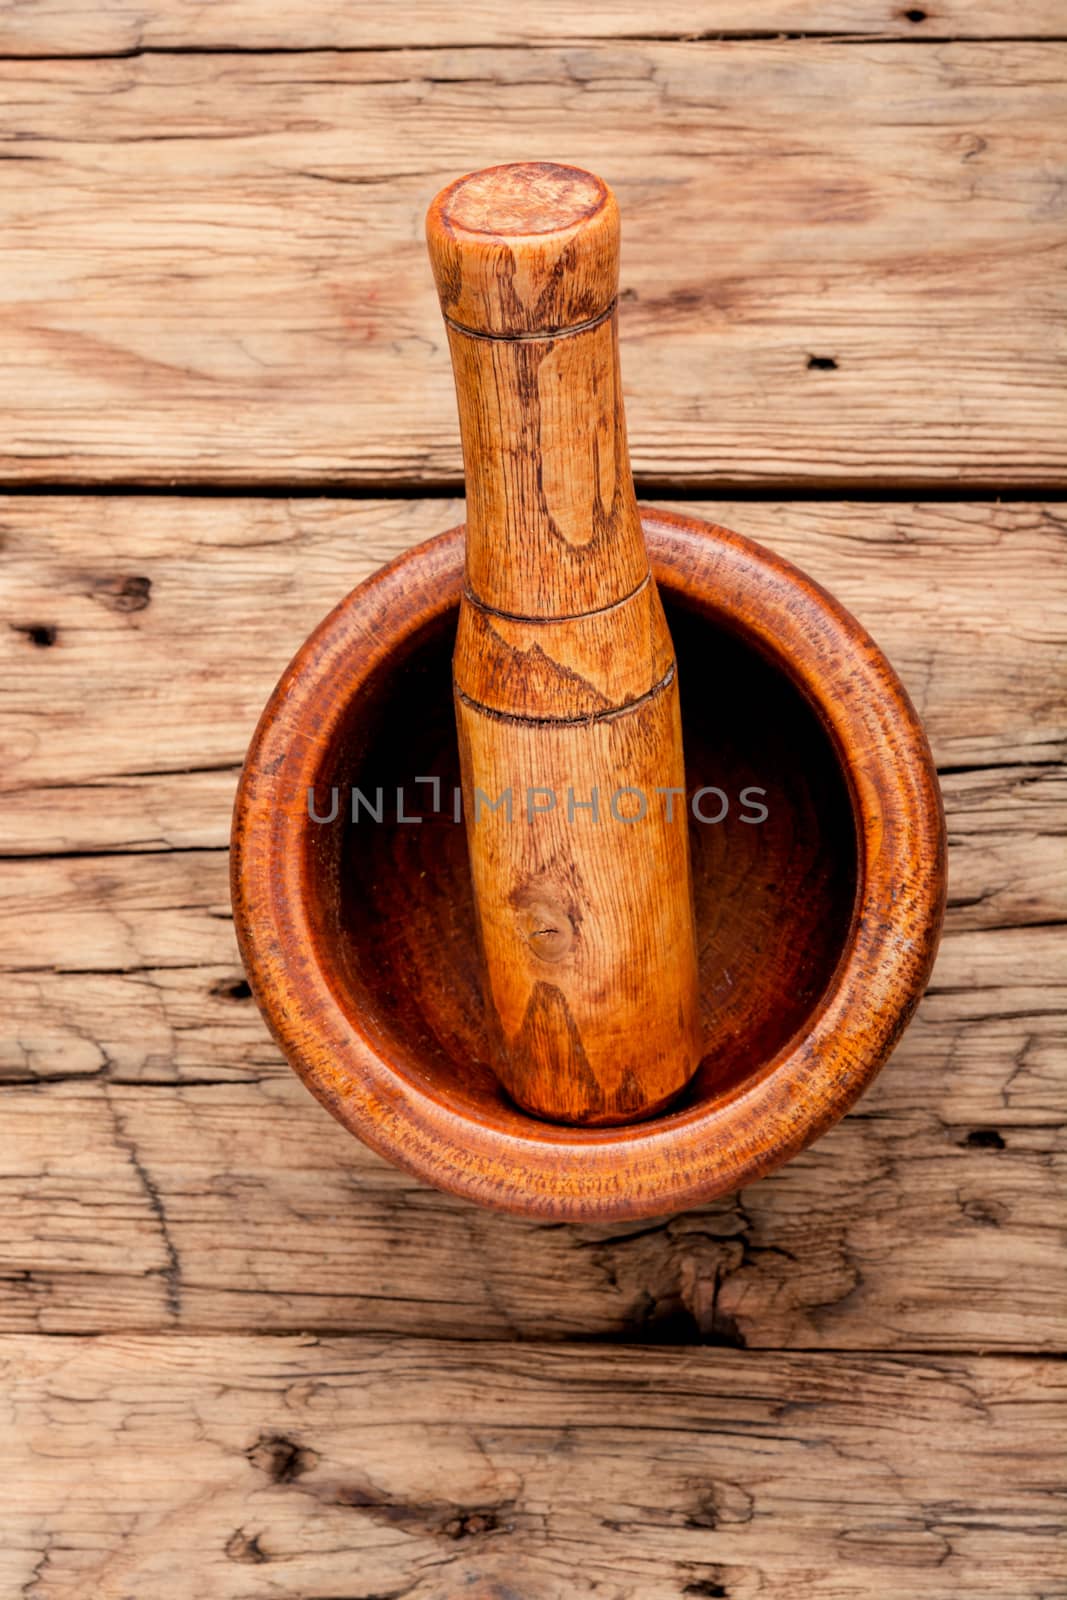 Mortar and pestle by LMykola